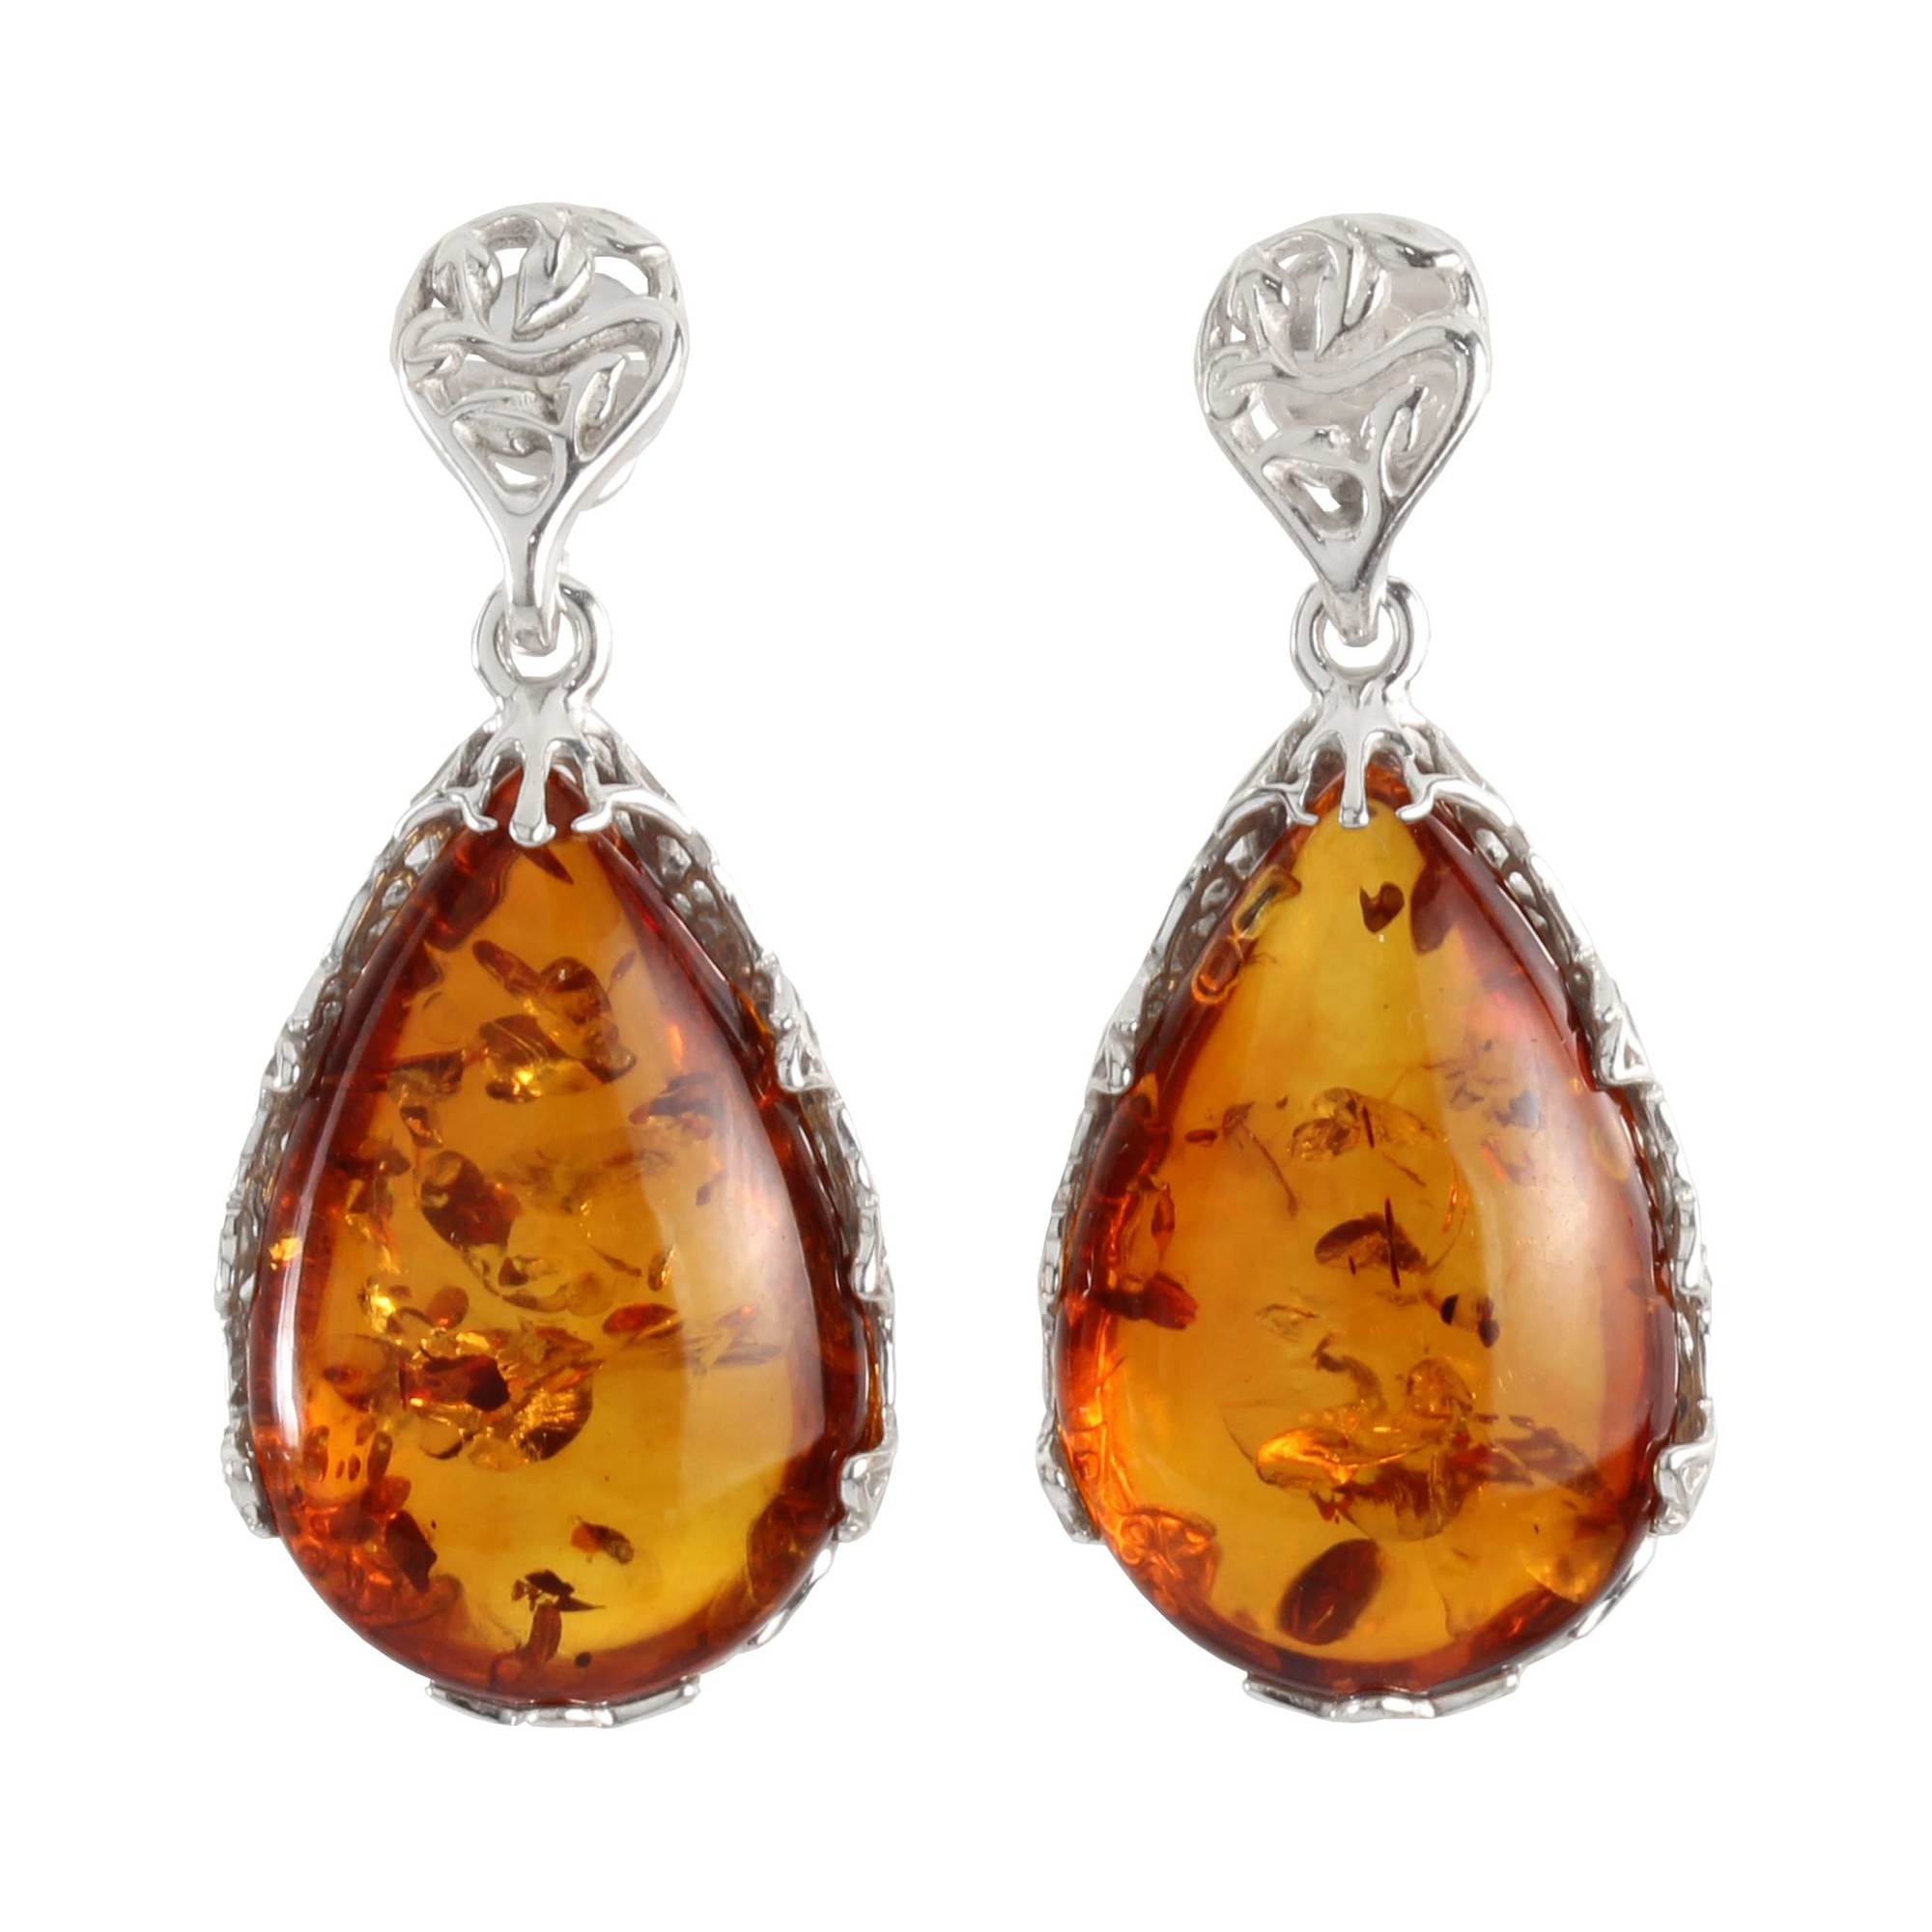 Details about   Handmade Amber sterling silver chandelier earrings 